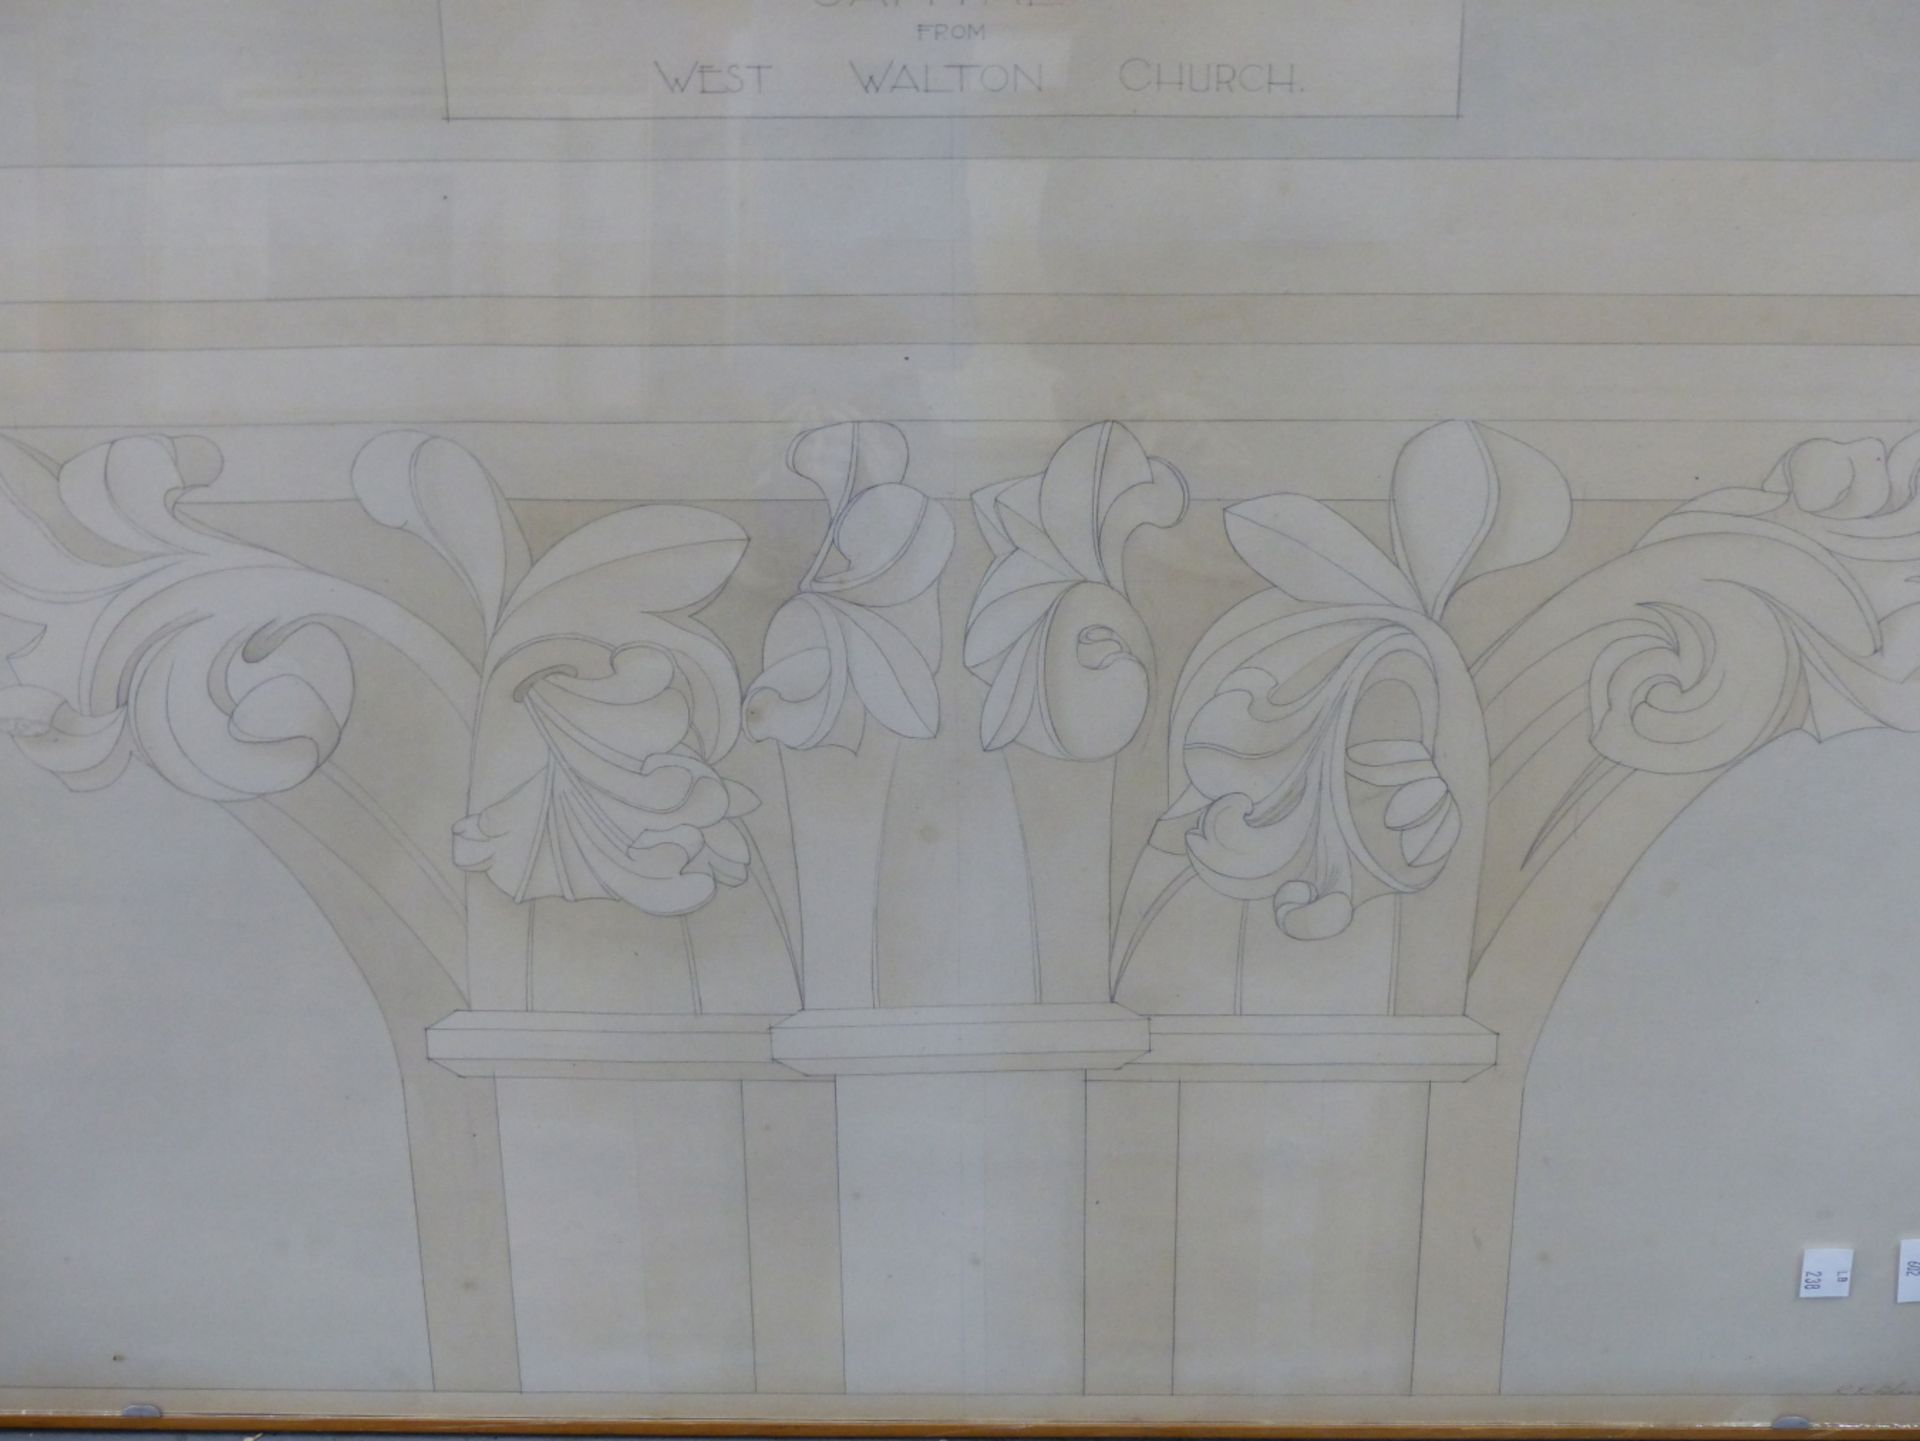 R.R. BLUNT (EARLY 20TH CENTURY), CAPITAL FROM WEST WALTON CHURCH, ARCHITECTURAL STUDY, SIGNED,